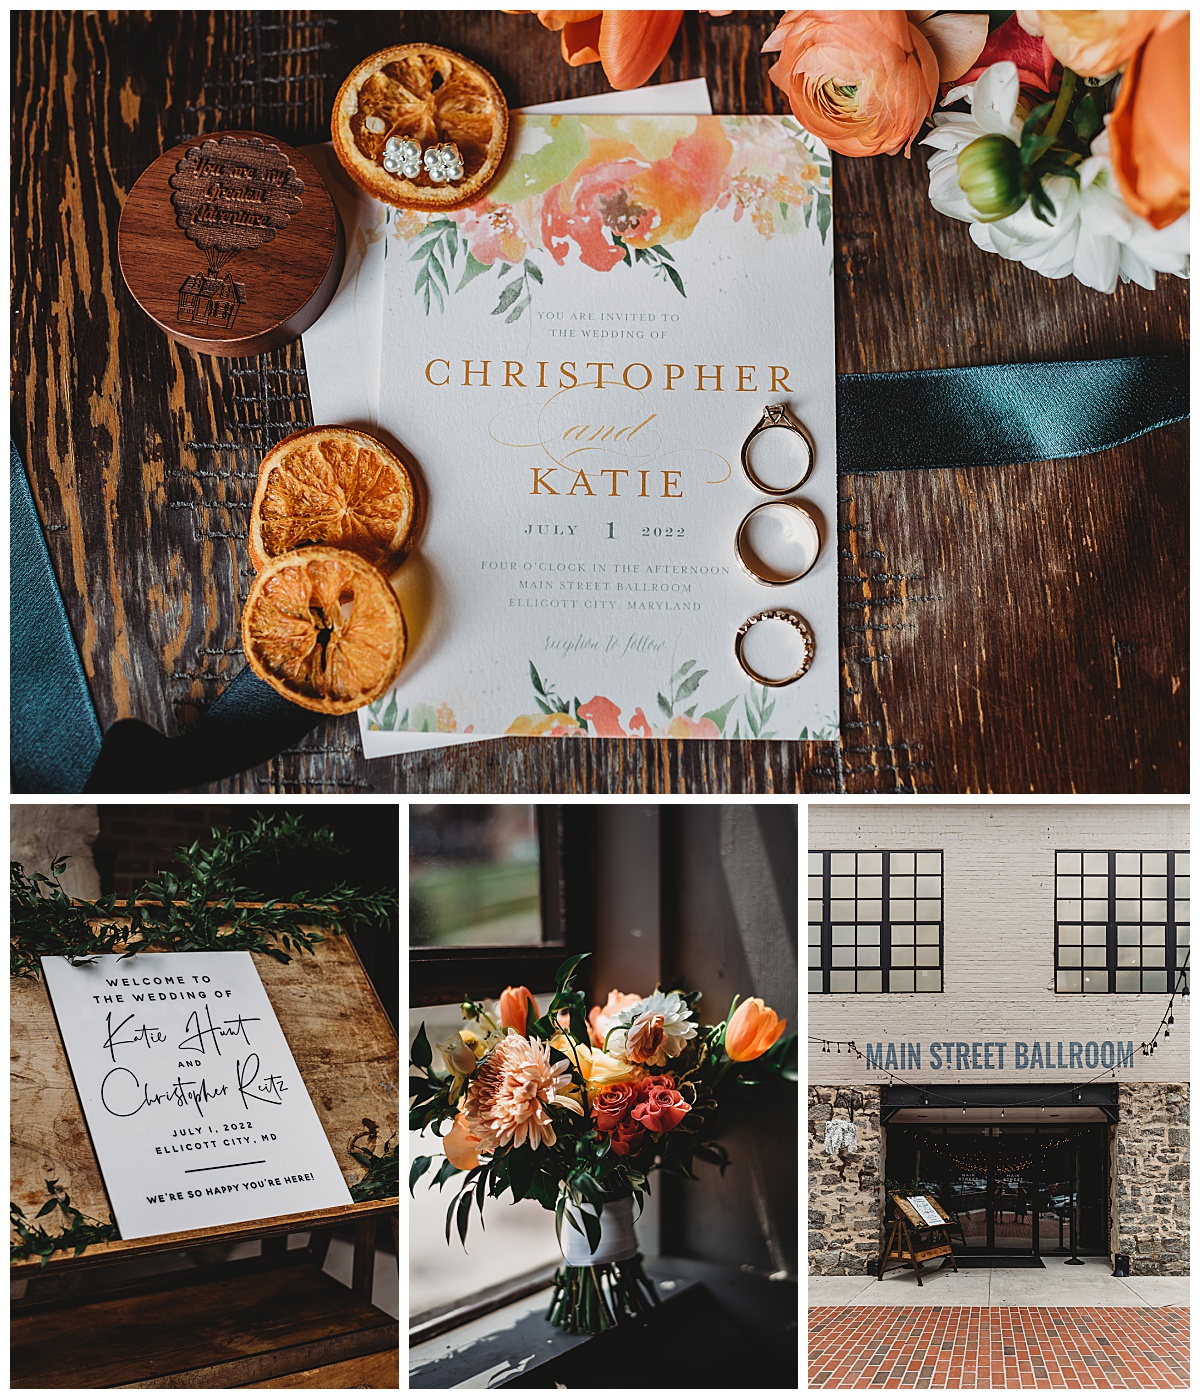 Colorful floral wedding invitation with wedding rings and dried orange slices for a summer wedding in Ellicott City, MD captured by Brittany Dunbar Photography, an Ellicott City Wedding Photographer.